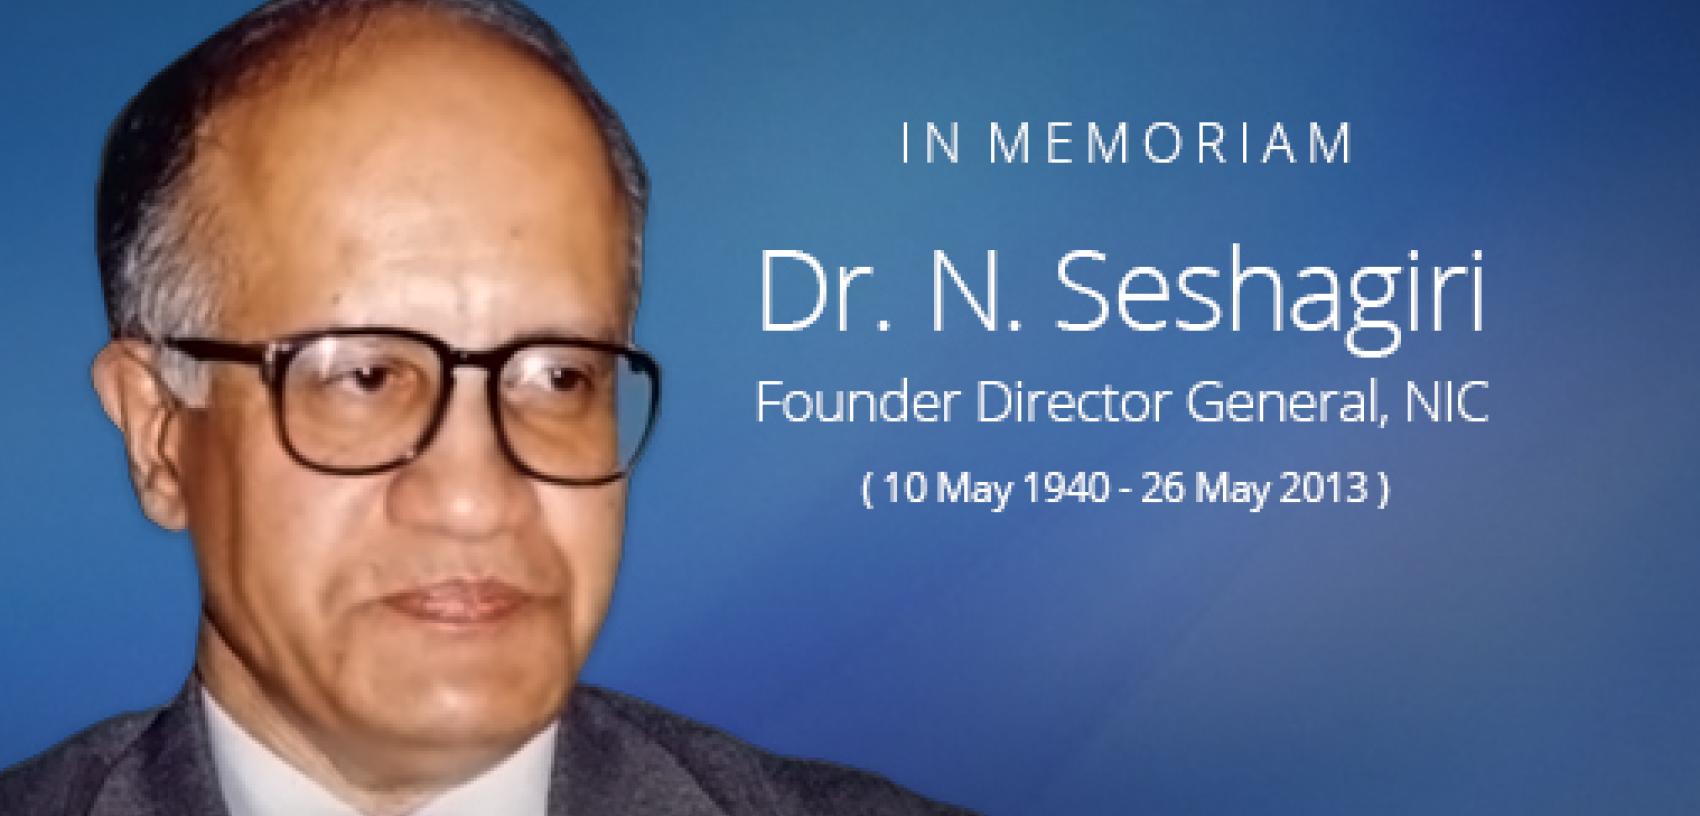 Remembering Dr. N. Seshagiri, India's ICT Evangelist and Founder Director General of National Informatics Centre